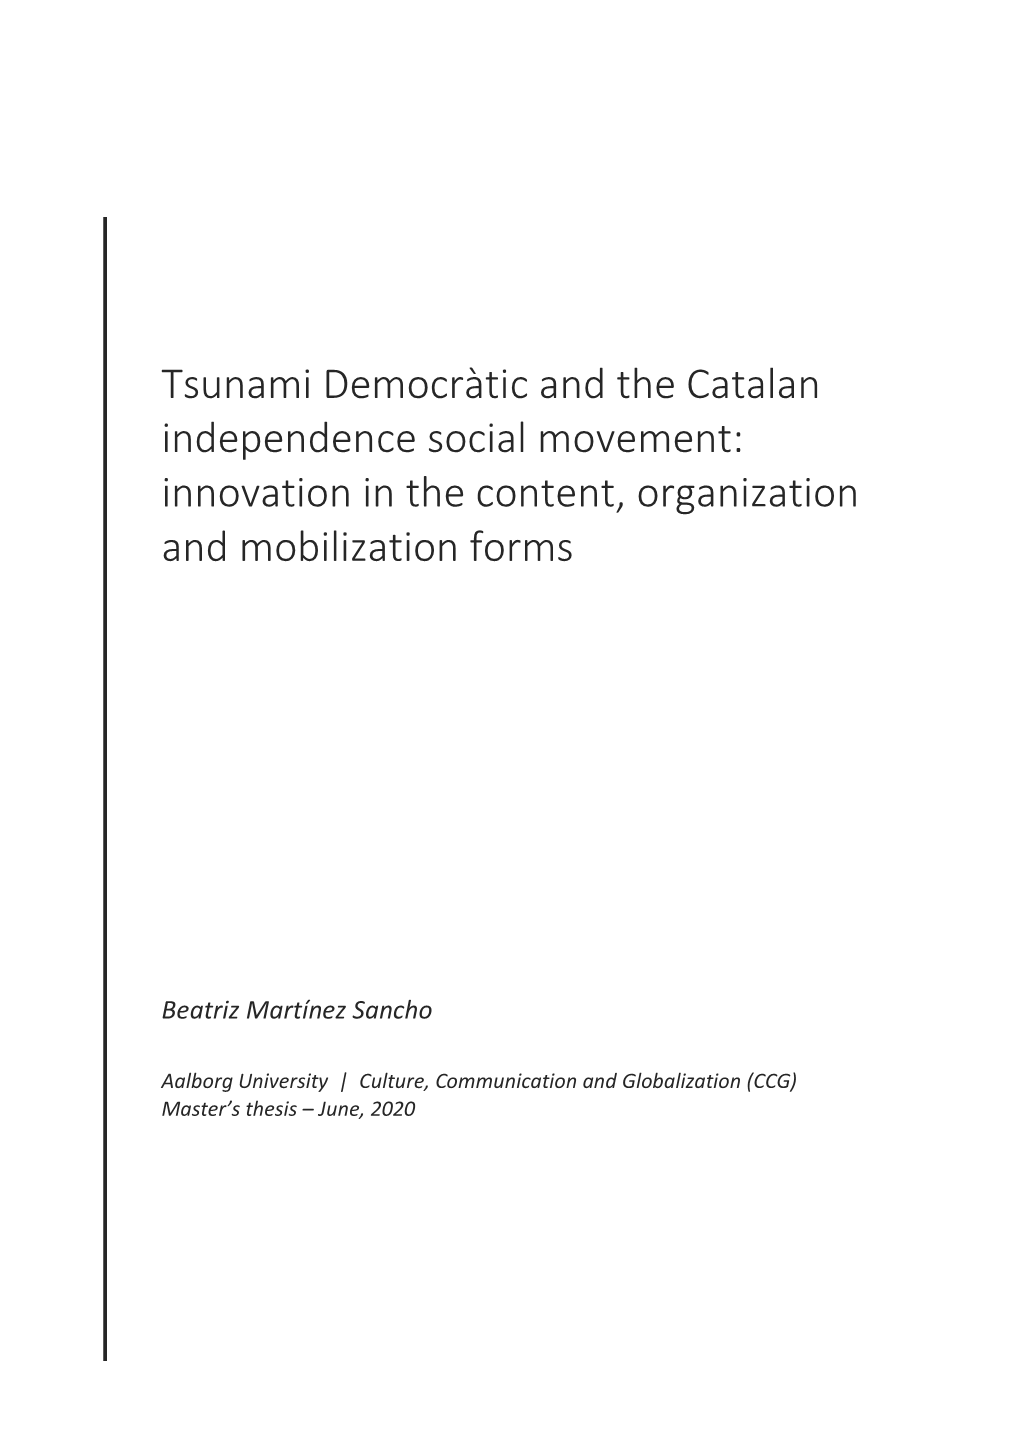 Tsunami Democràtic and the Catalan Independence Social Movement: Innovation in the Content, Organization and Mobilization Forms